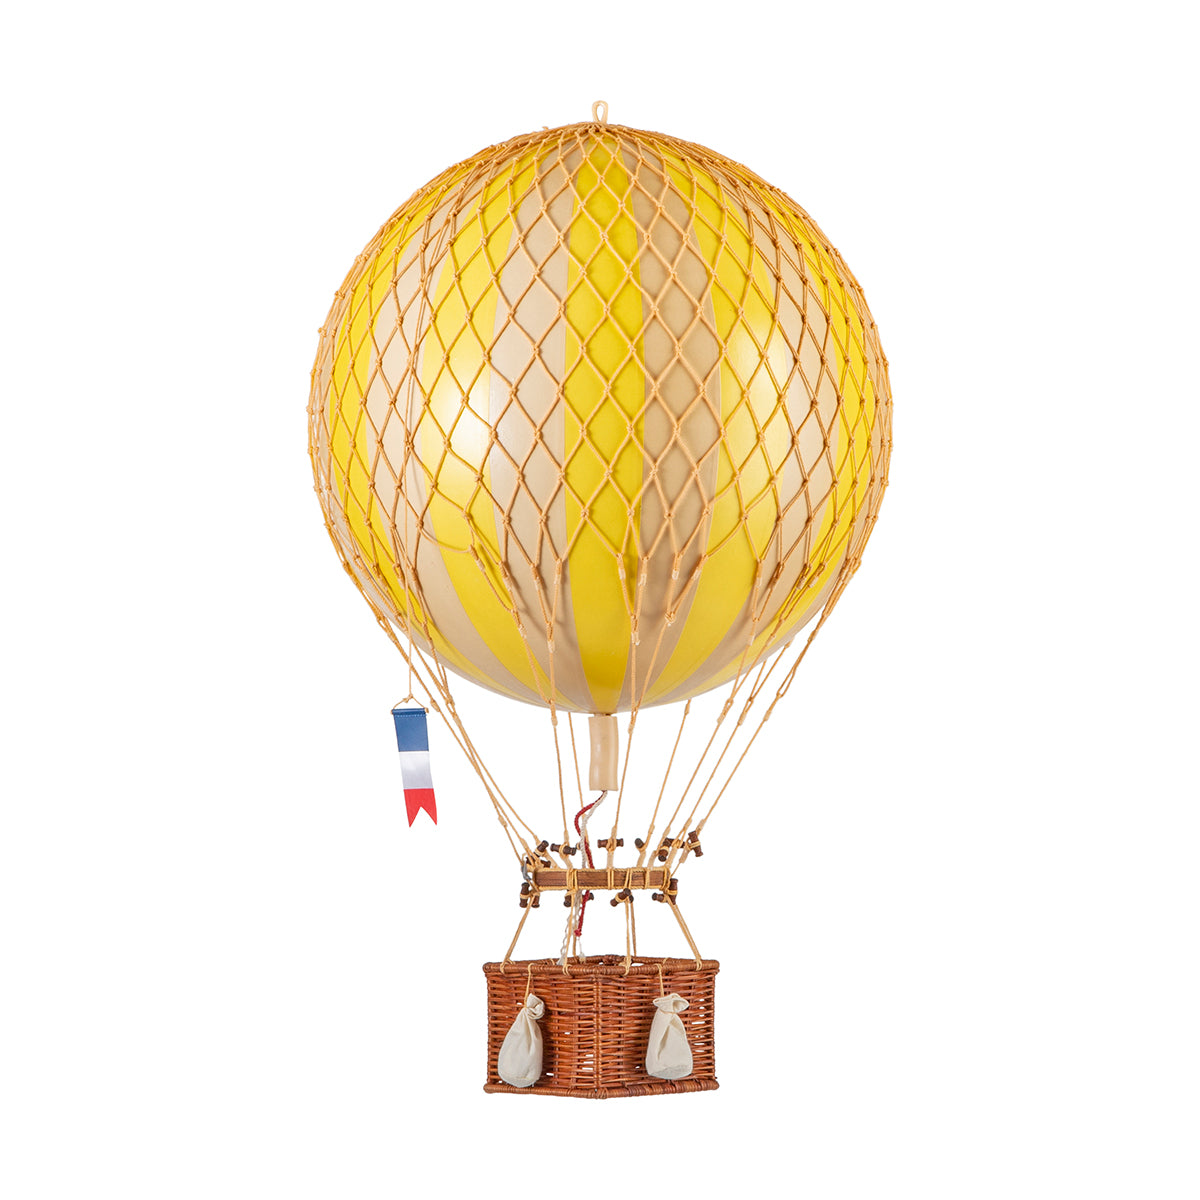 A unique perspective of a Wonderen Medium Hot Air Balloon - Royal Aero, soaring to new heights against a white background, offered by Wonderen Stroopwafels.